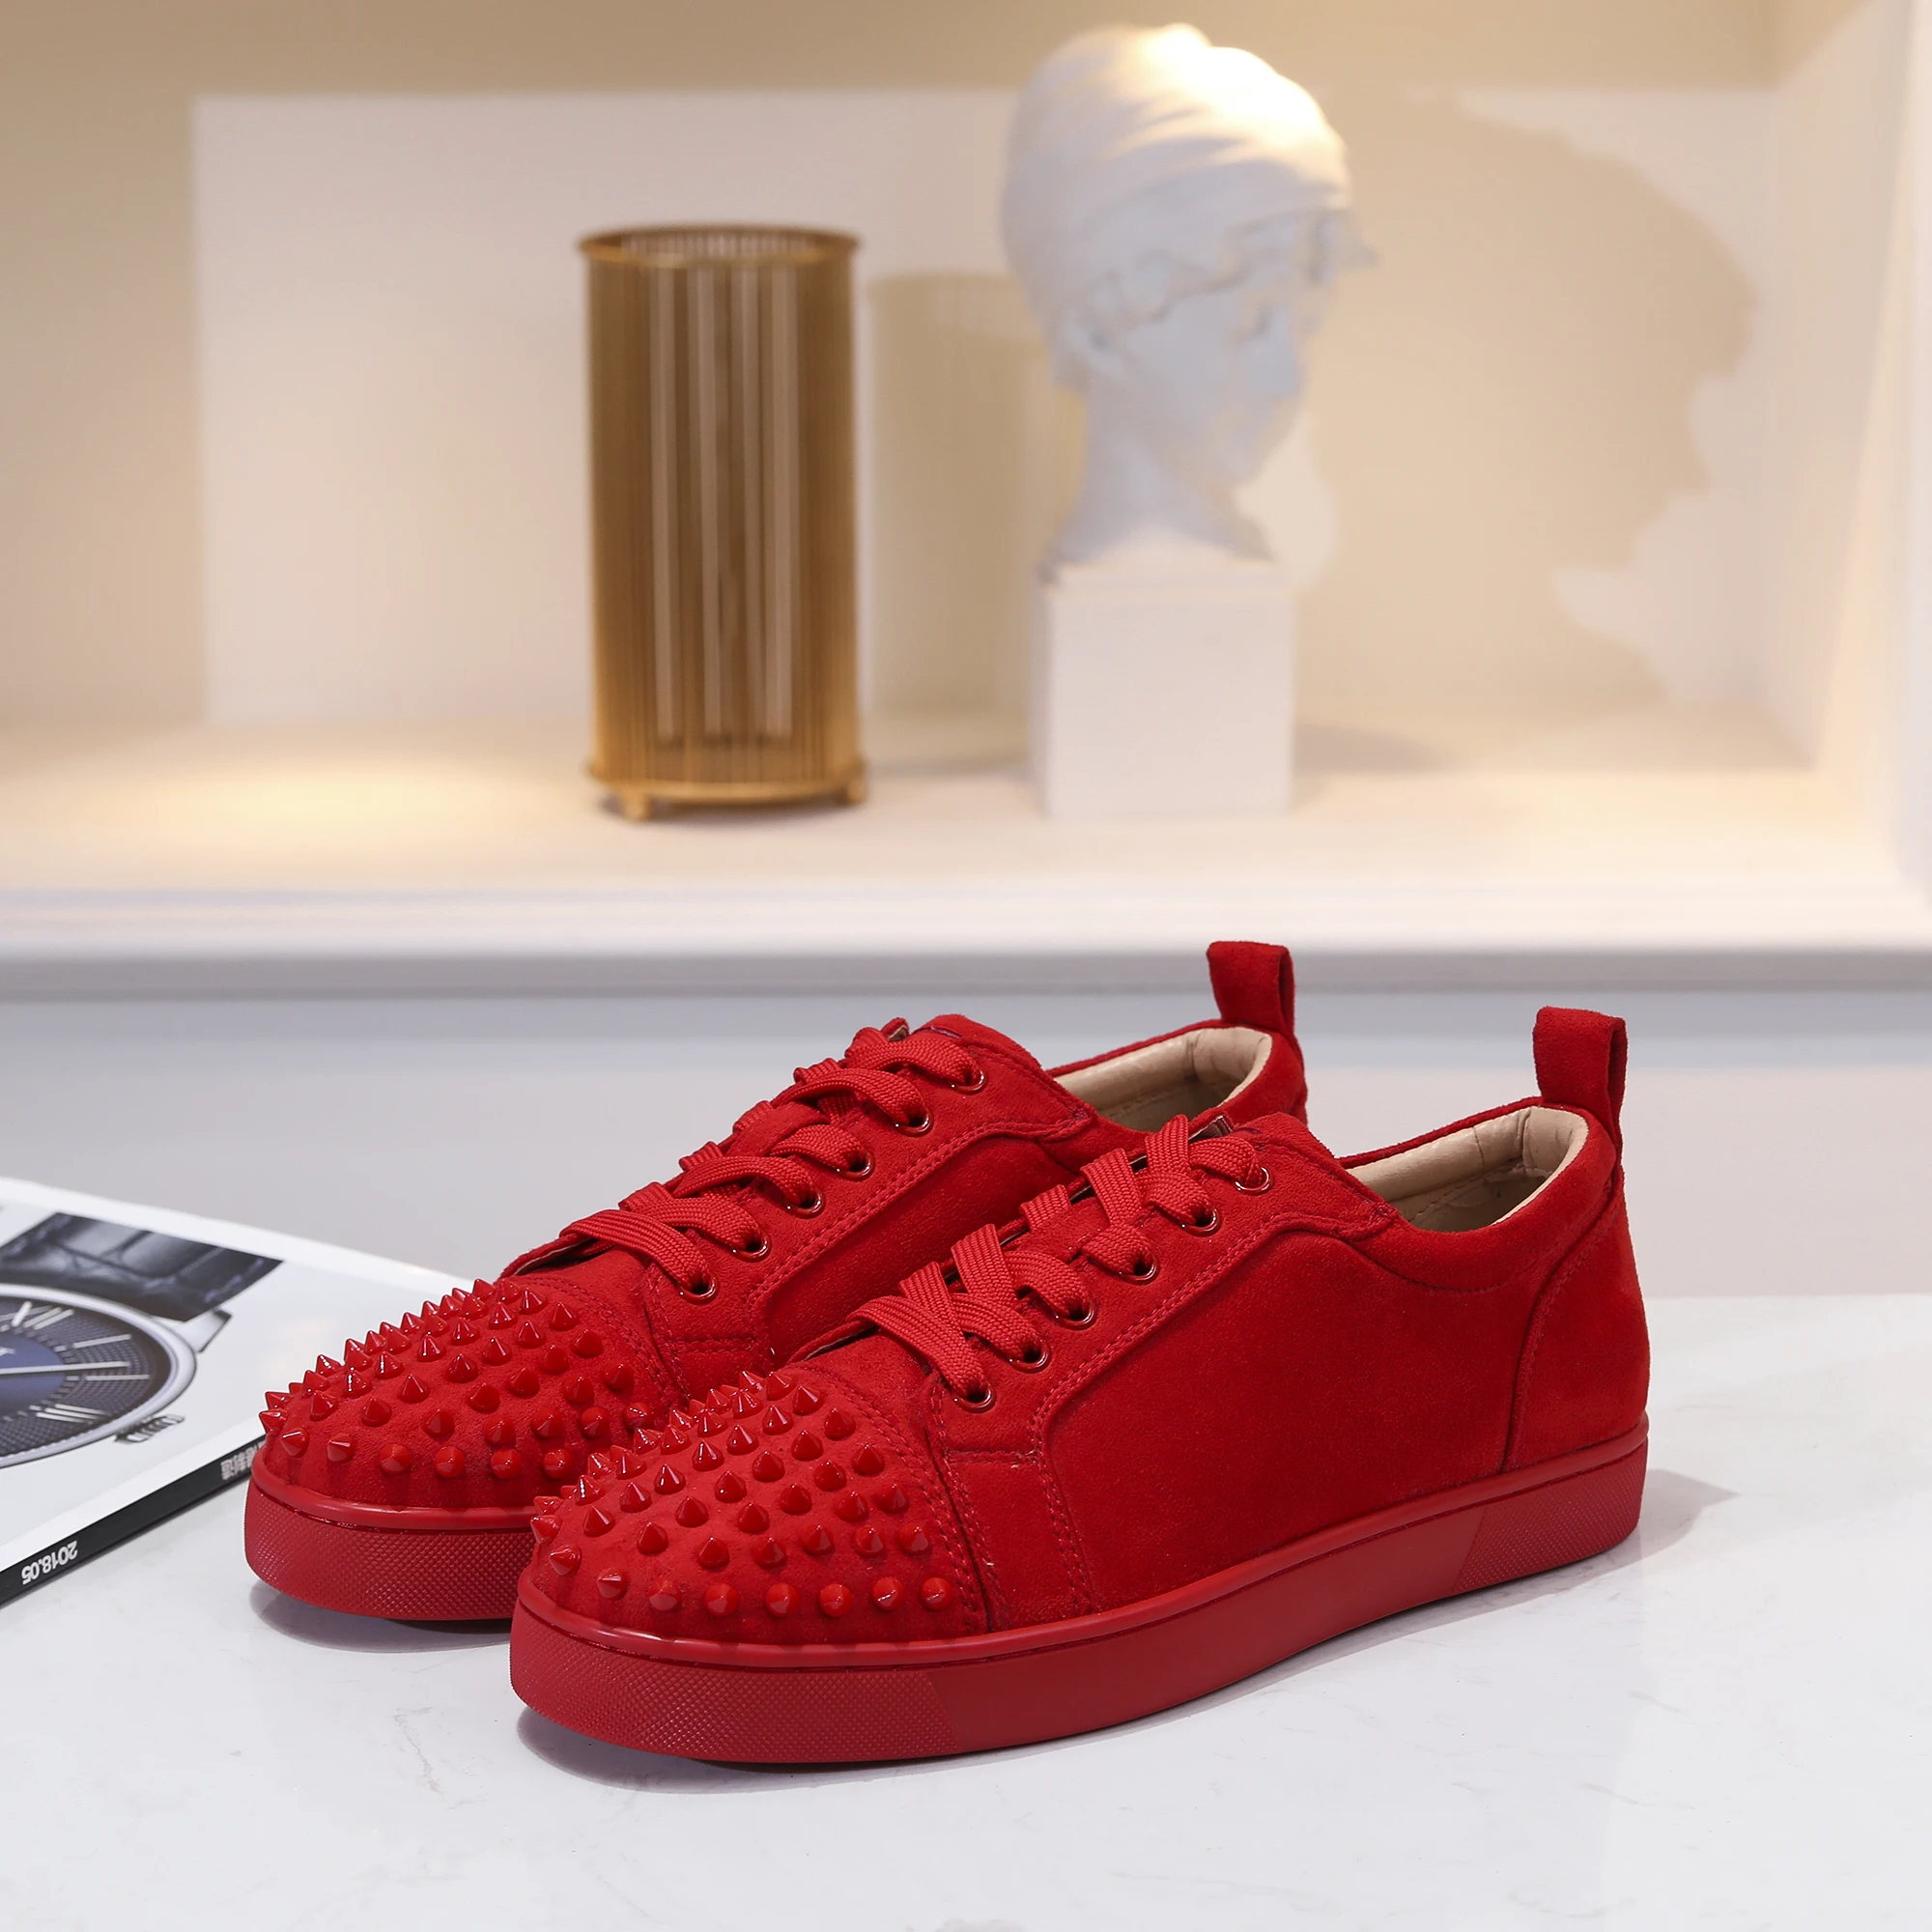 Luxury Brands Real Crystal Leather Red Bottoms High Tops Shoes For Men's  Casual Flats Loafers Women's Rhinestone Spikes Sneakers